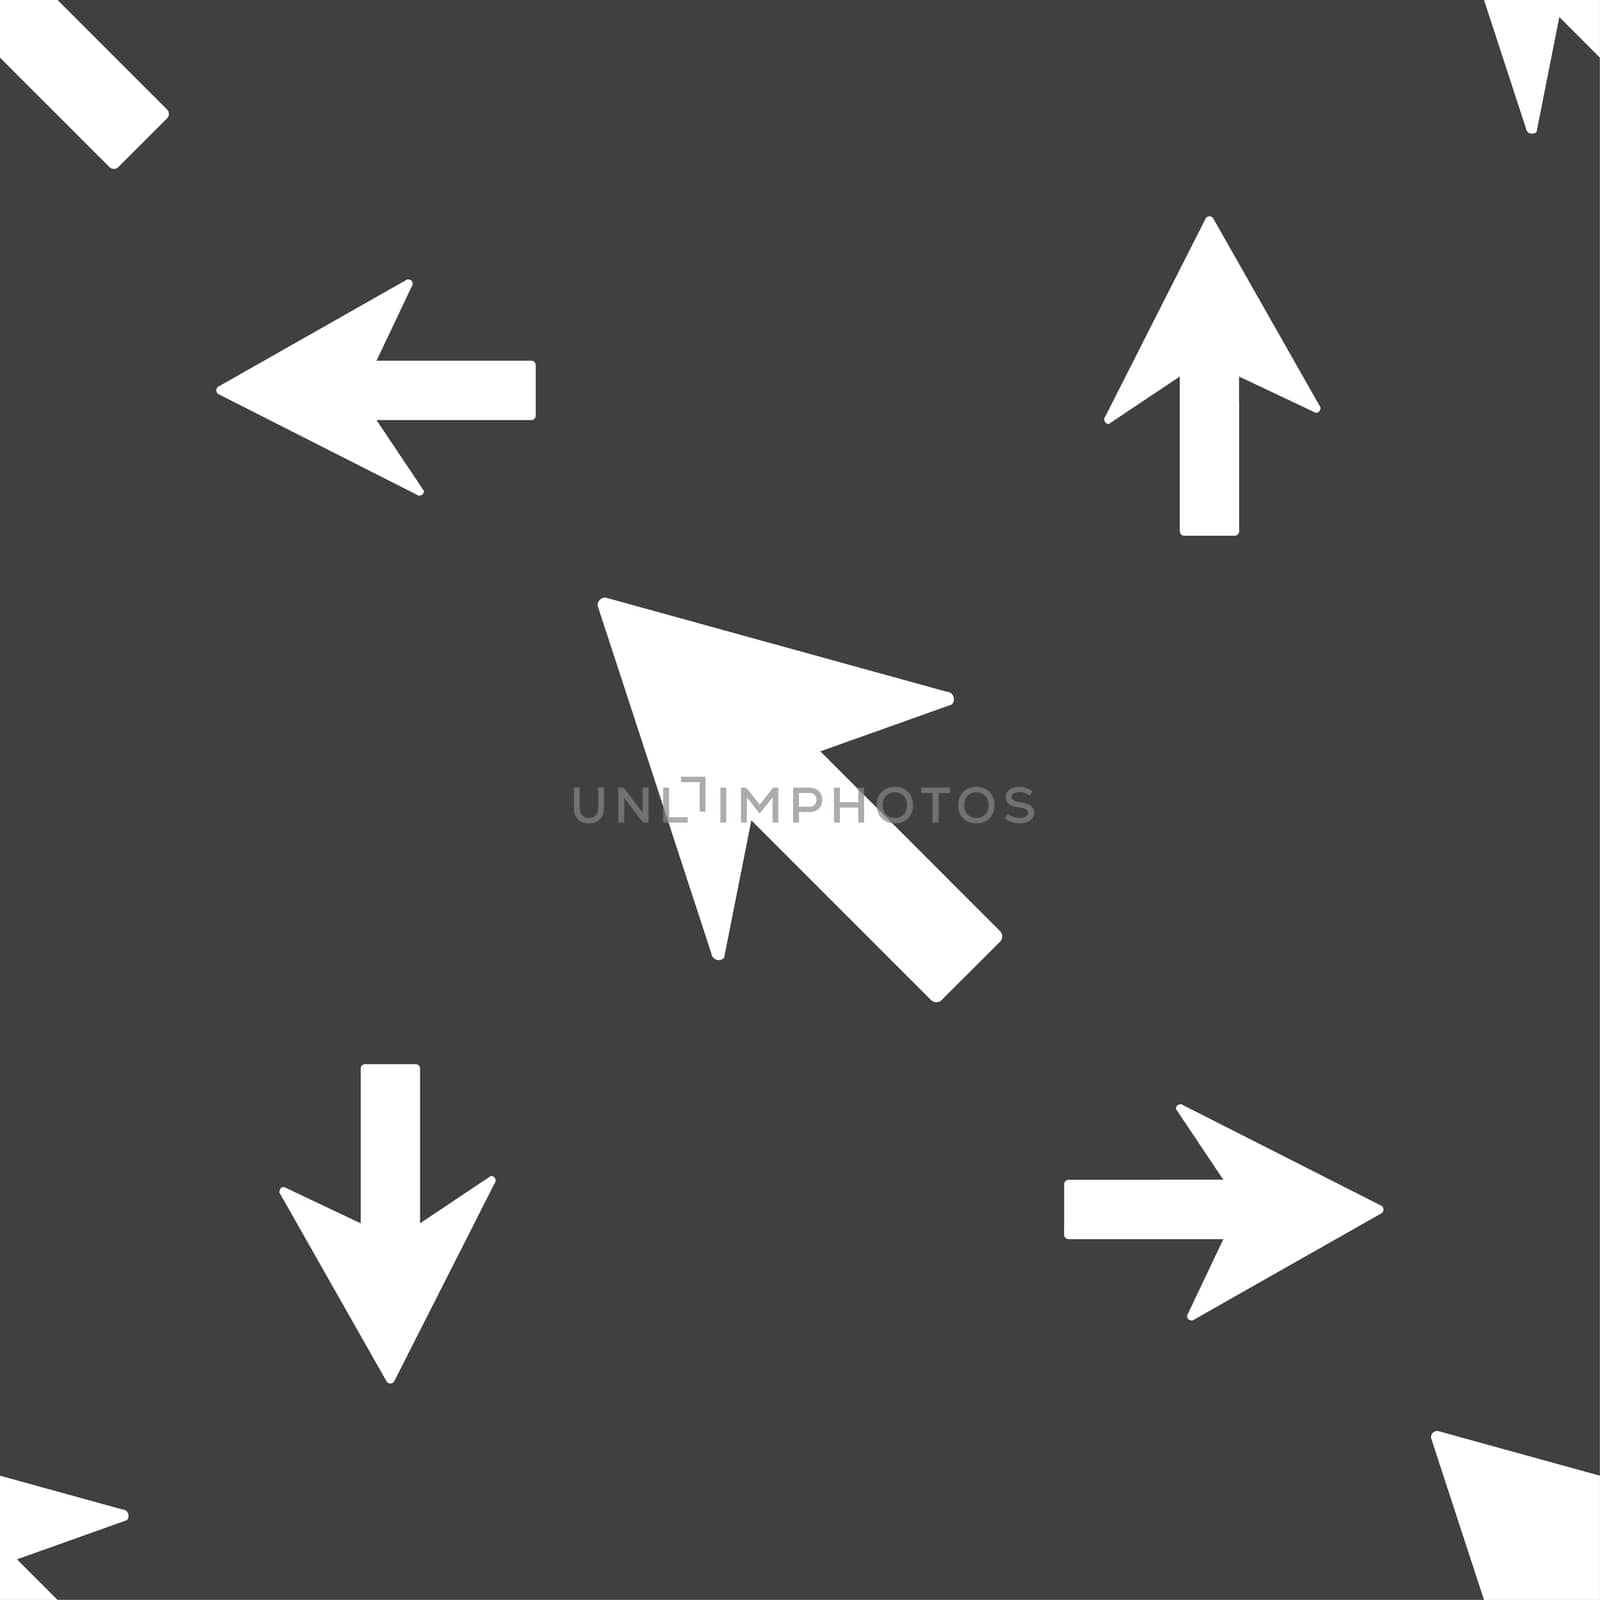 Cursor, arrow icon sign. Seamless pattern on a gray background. illustration